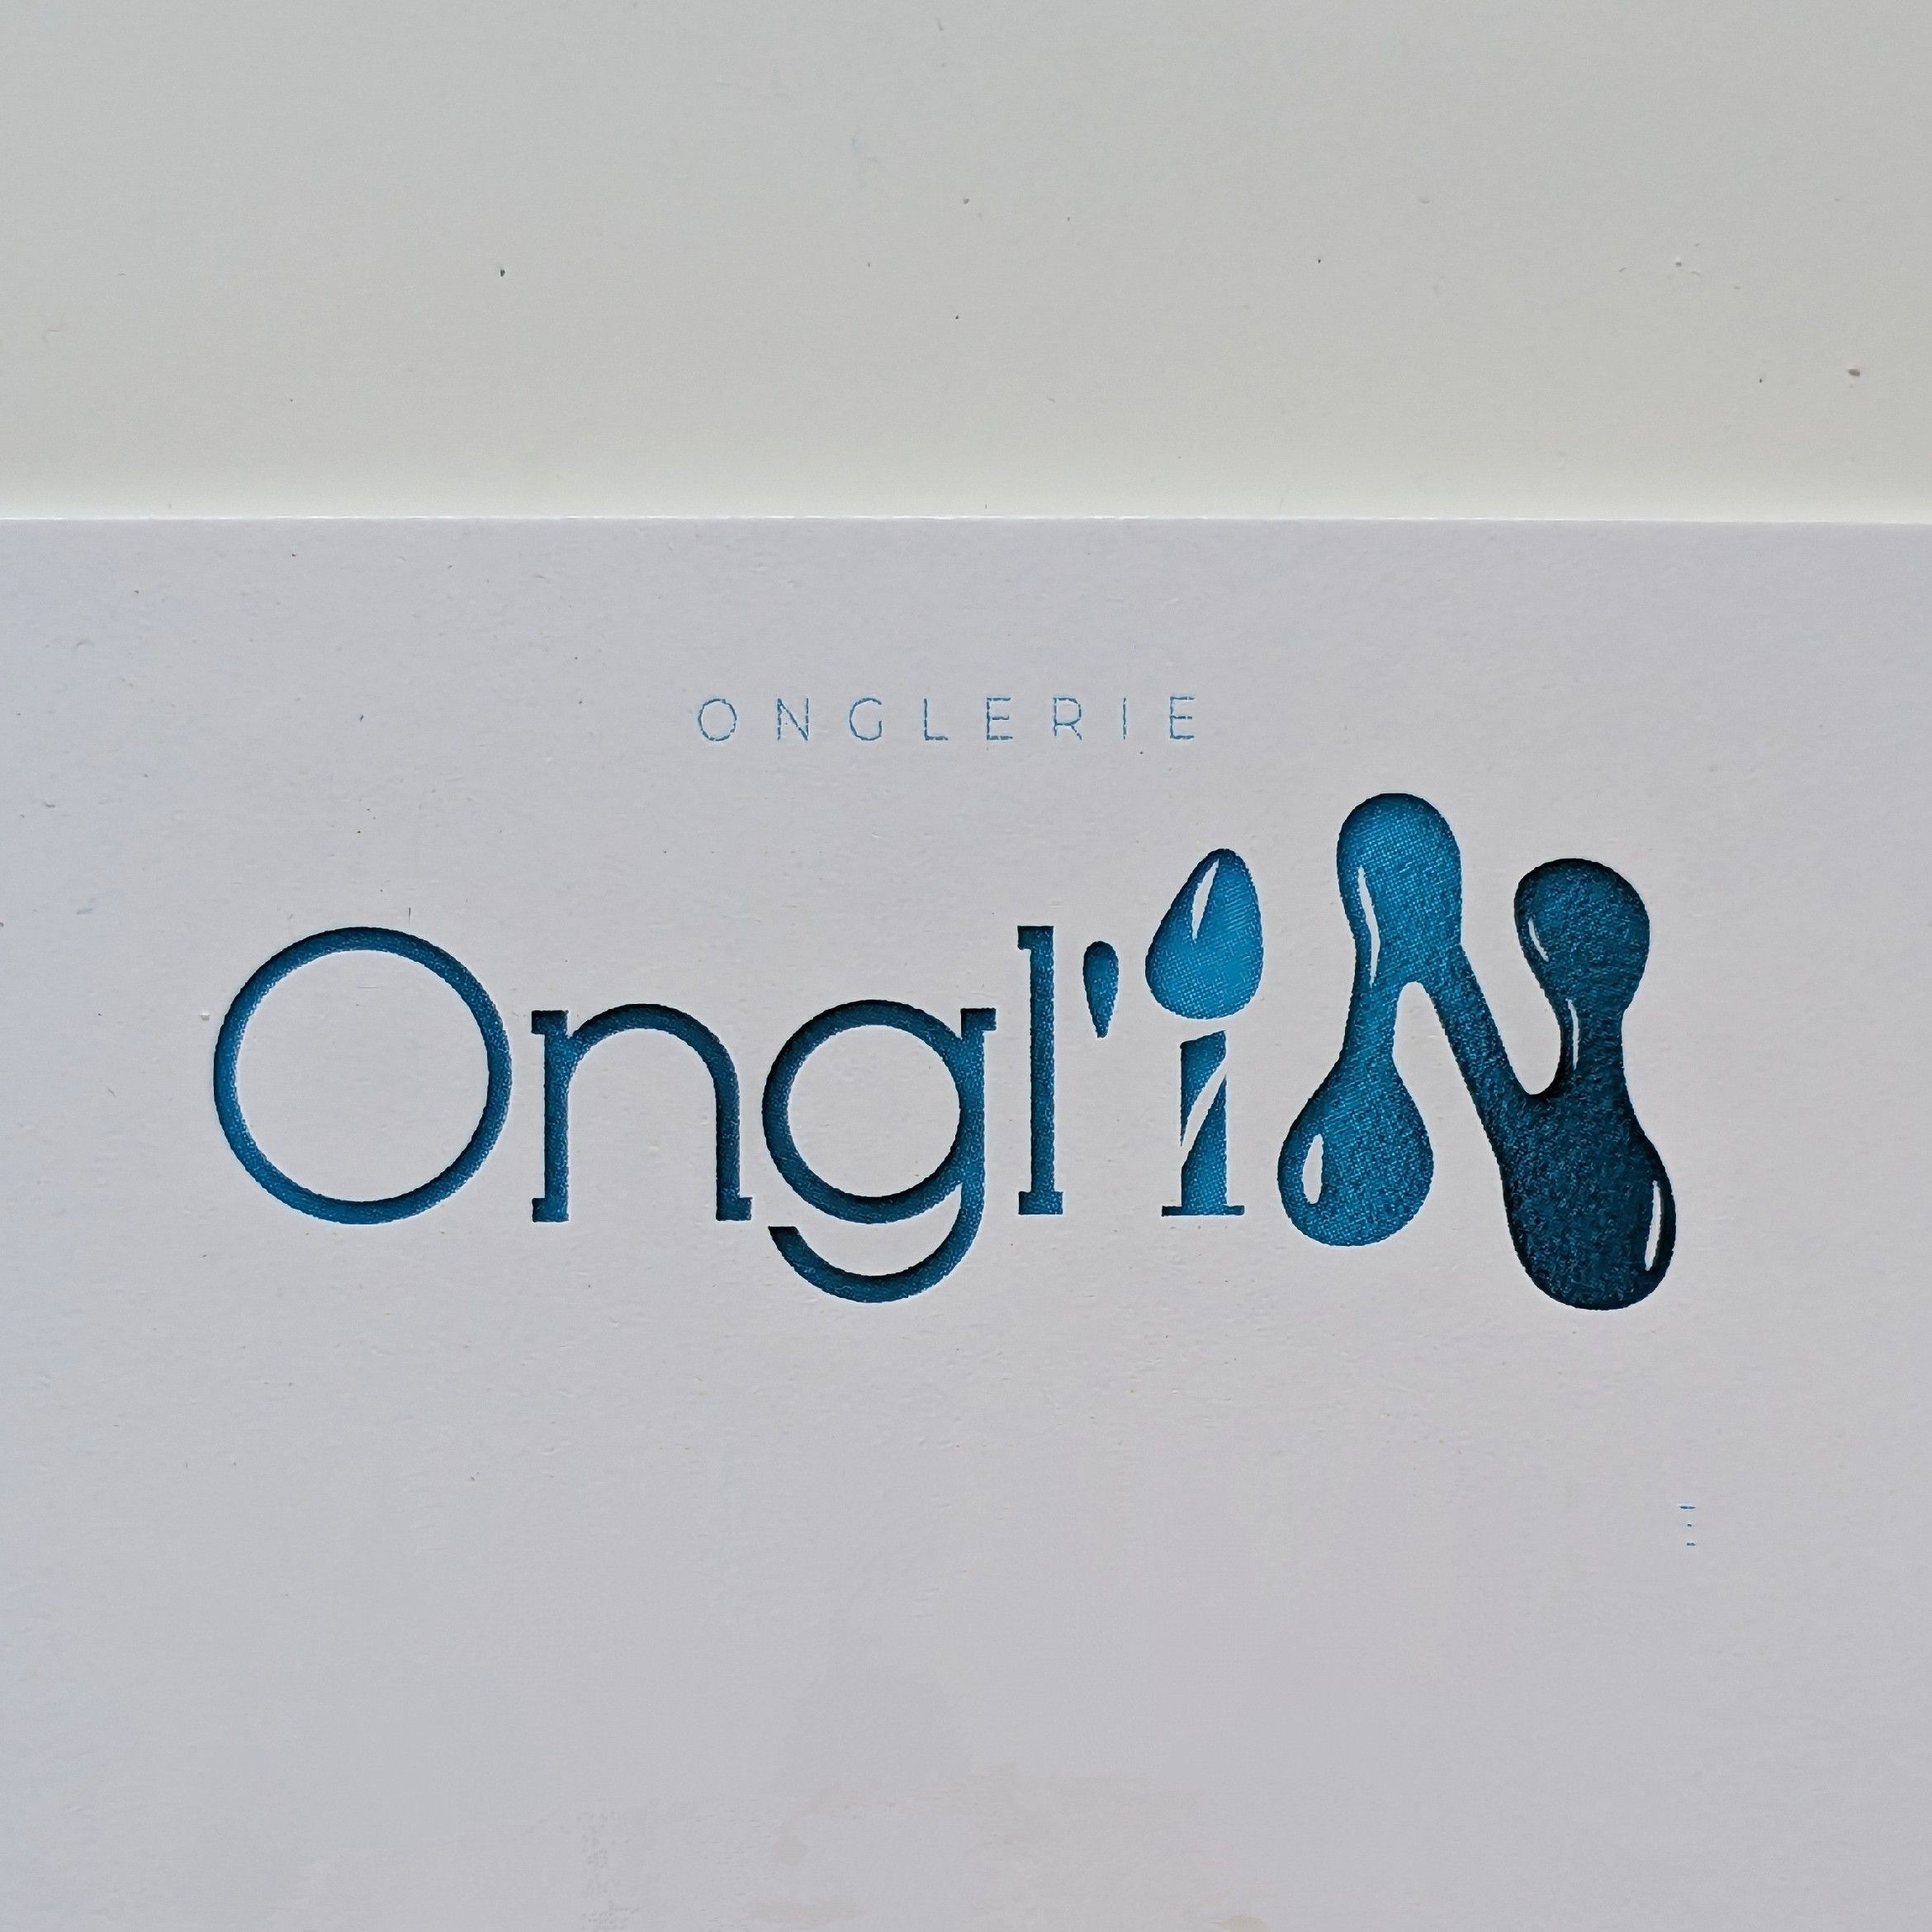 Ongl'iN, 177 Avenue Georges Pompidou, 73200, Gilly-sur-Isère